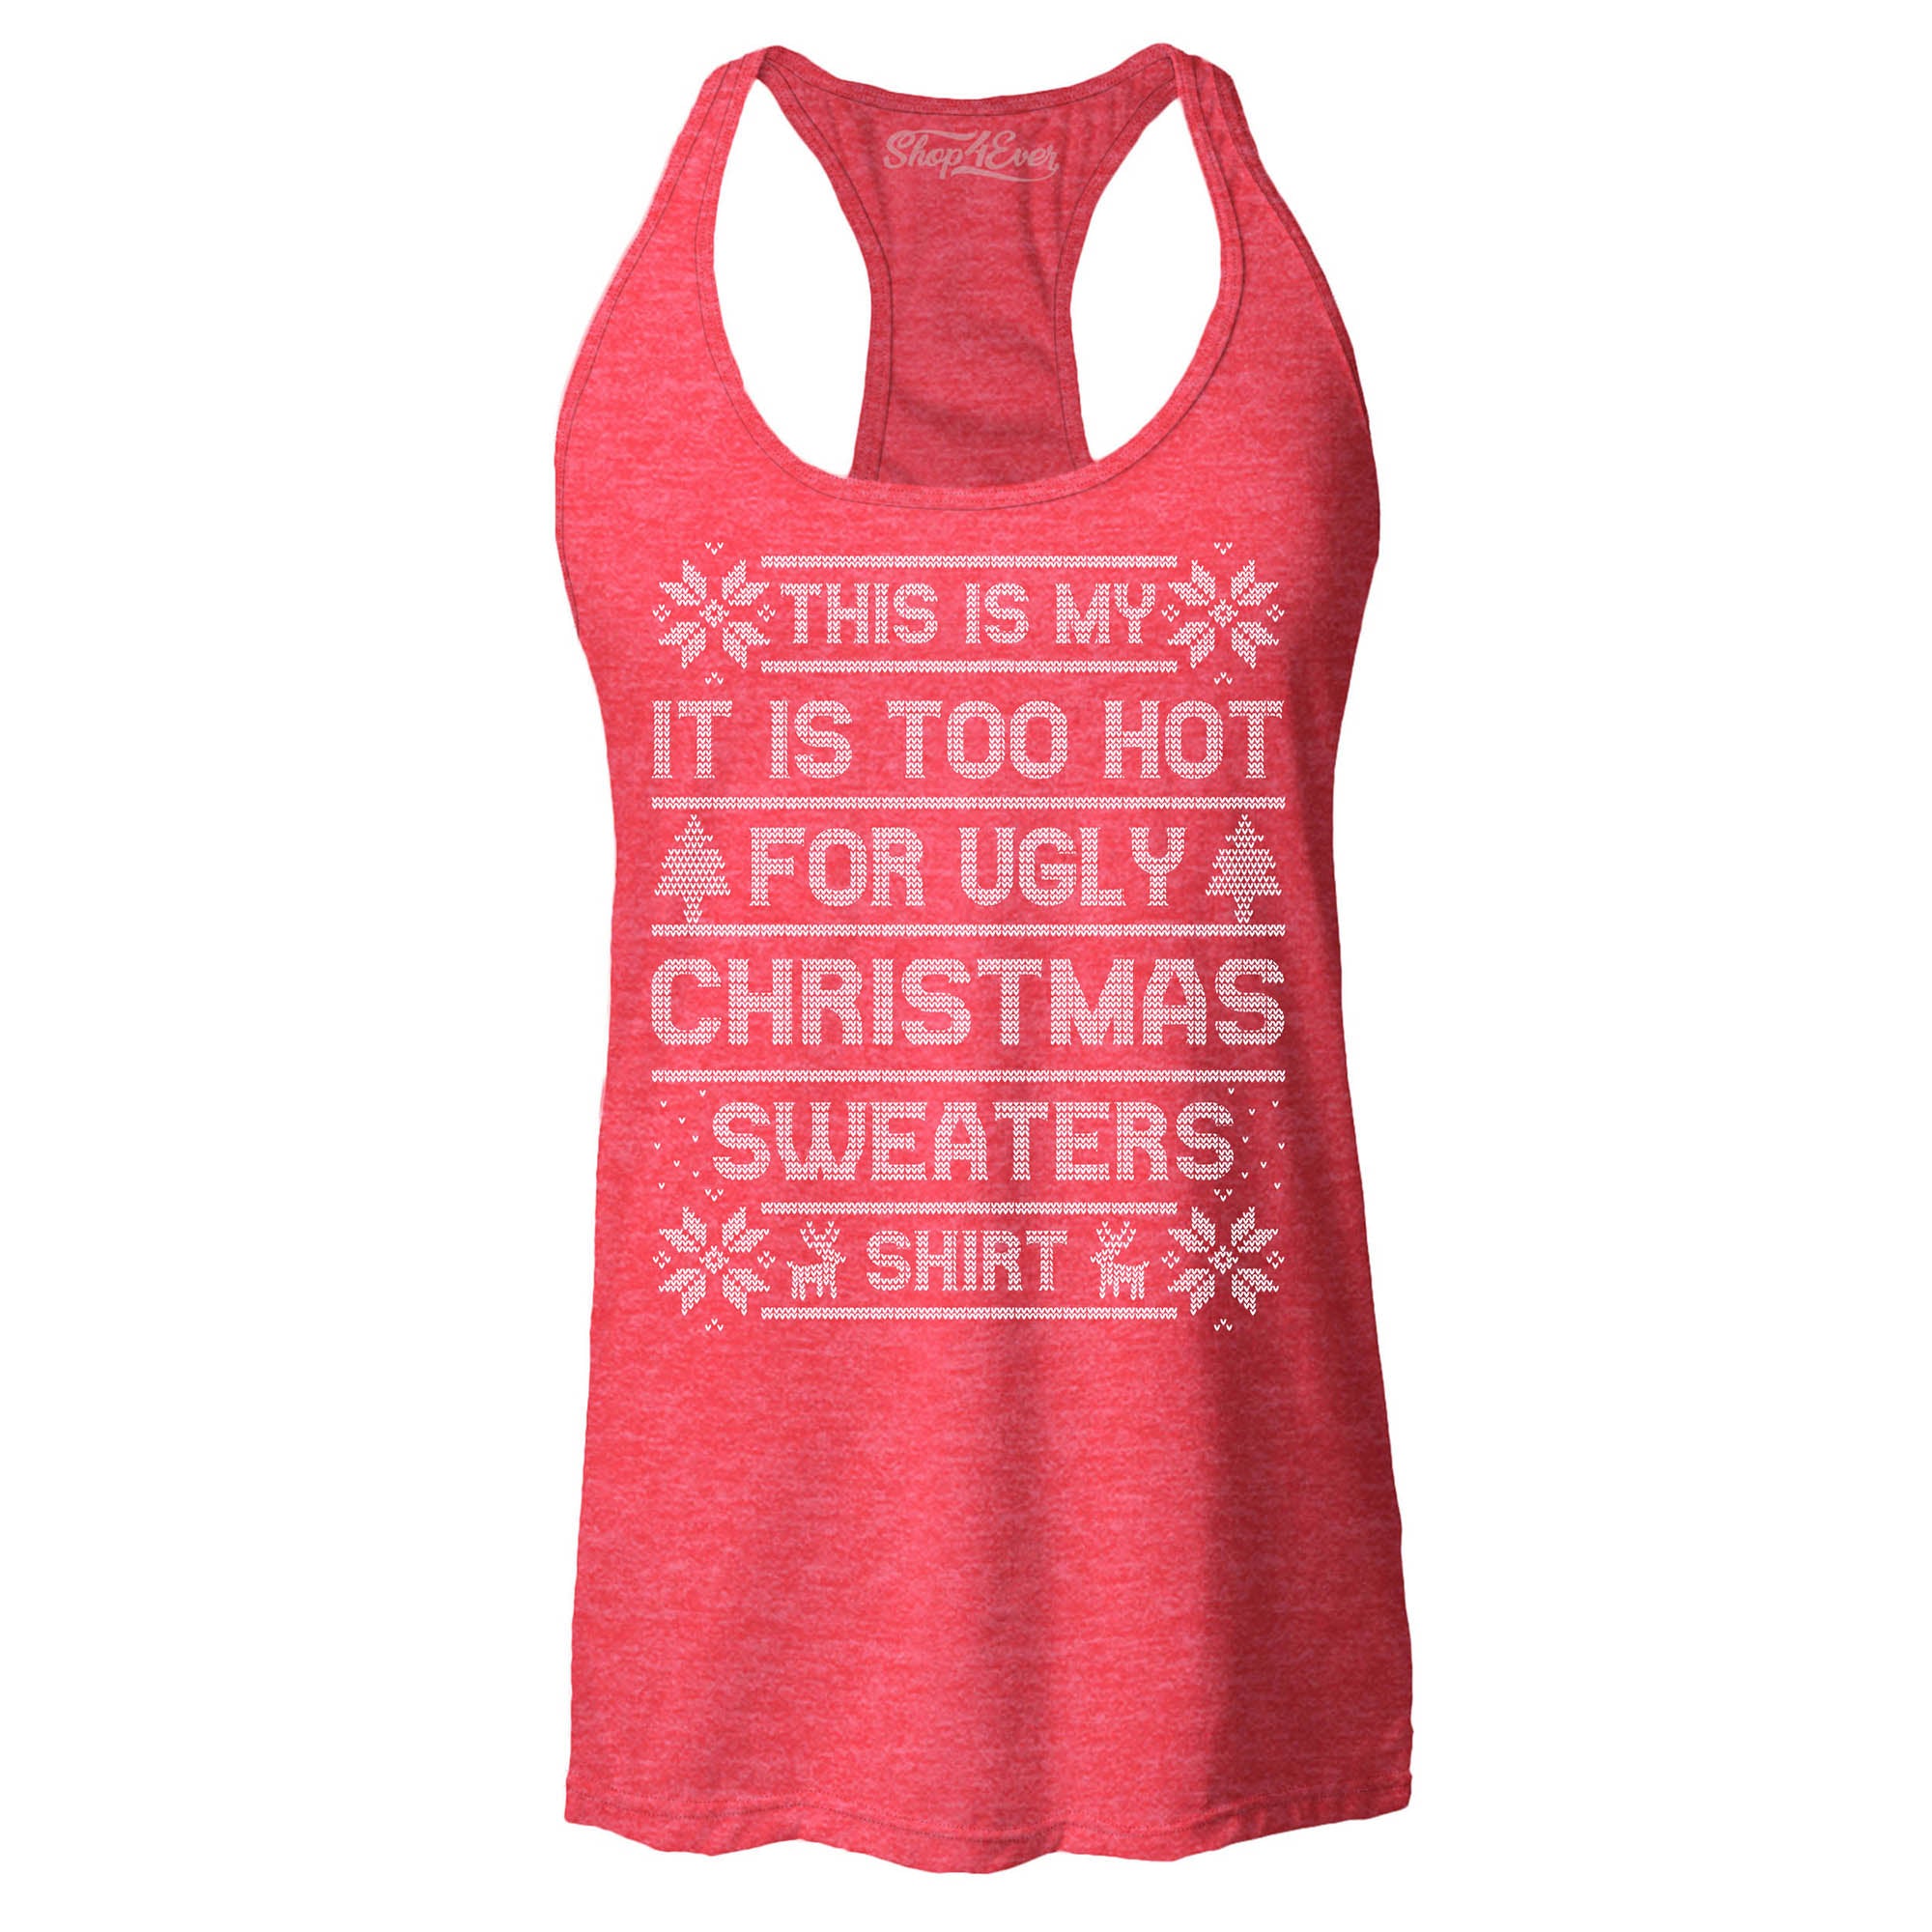 This is My It's Too Hot for Ugly Christmas Sweaters Shirt Women's Racerback Tank Top Slim Fit